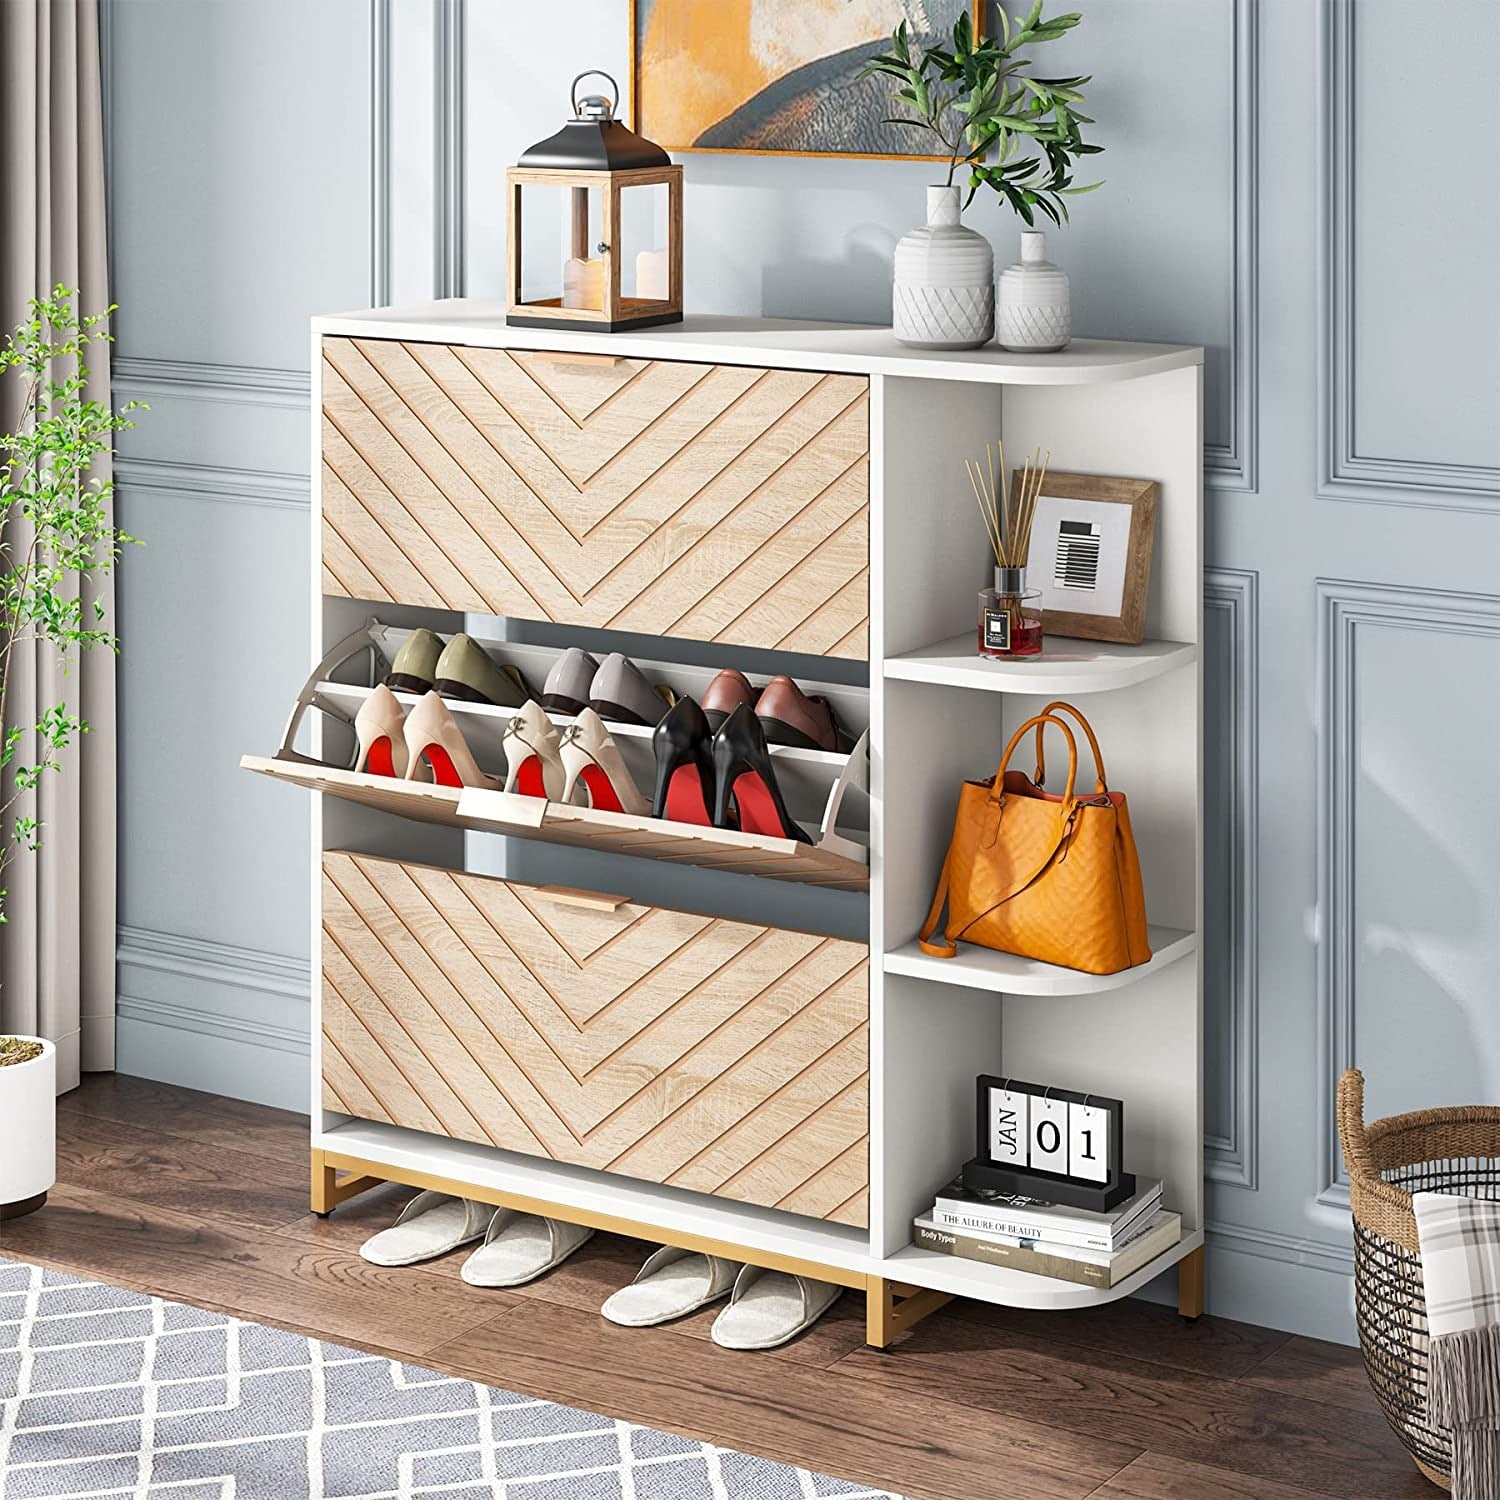 https://ak1.ostkcdn.com/images/products/is/images/direct/1e6c57fea1863d0cdadcab9249f6c2ec4fbe783d/Shoe-Cabinet%2C-24-Pair-Shoes-Storage-Cabinet-with-Doors-and-Shelves.jpg